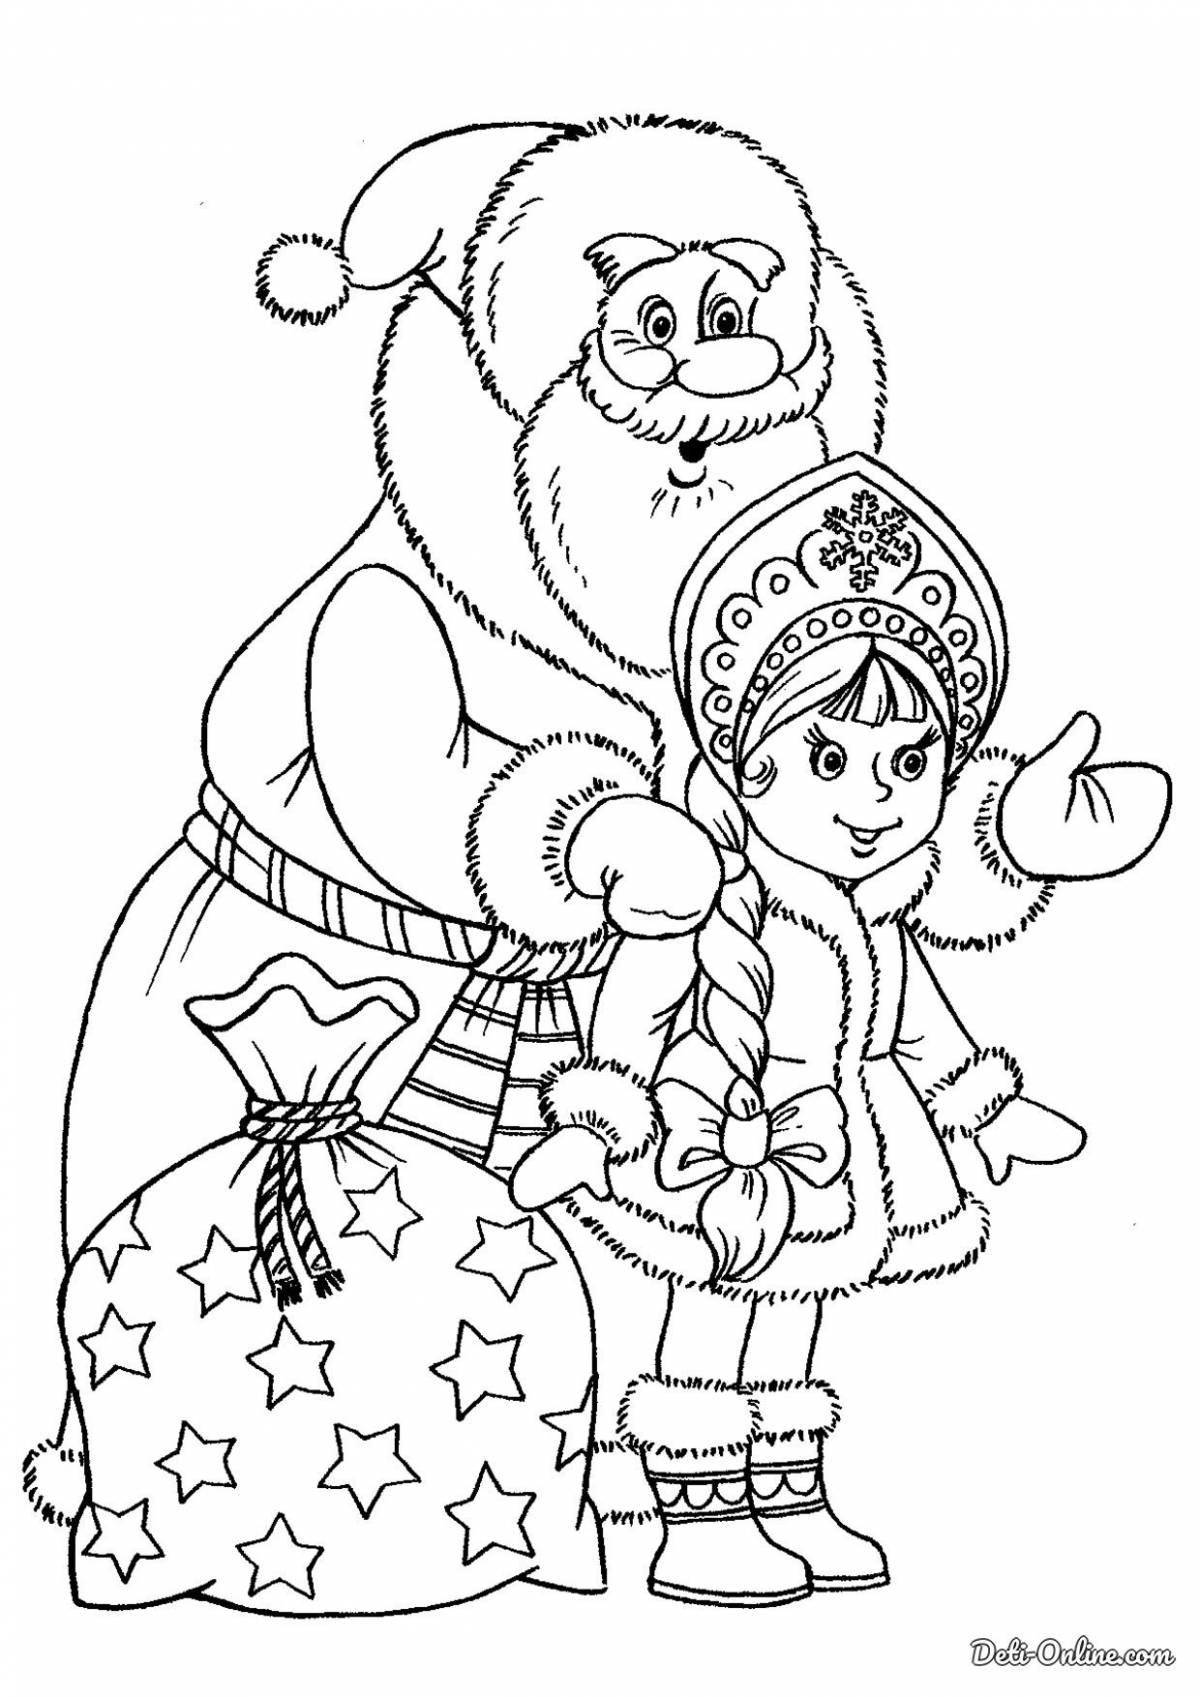 Coloring page dazzling snow maiden